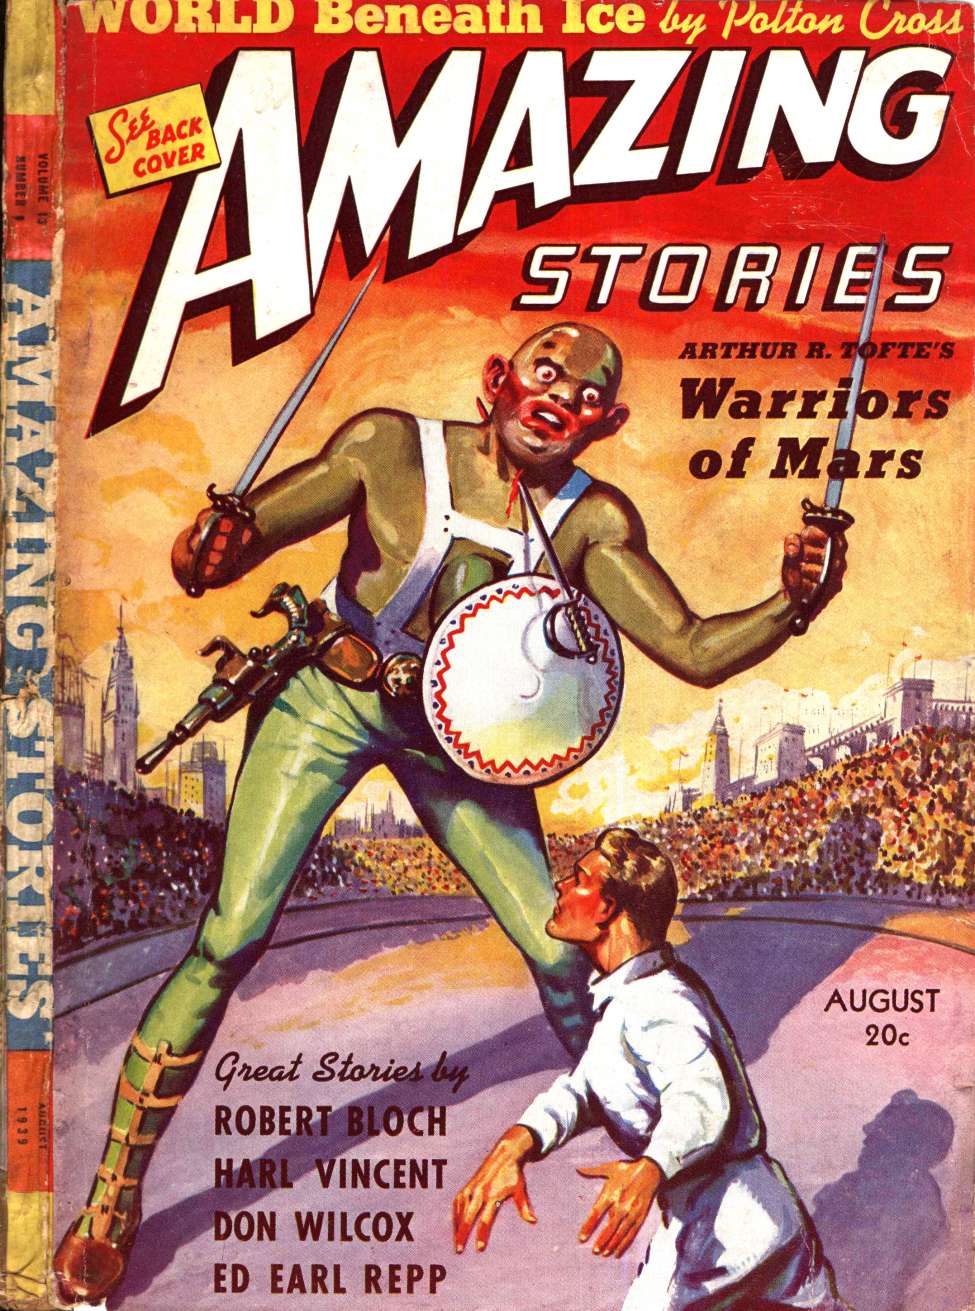 Book Cover For Amazing Stories v13 8 - Warriors of Mars - Arthur Tofte